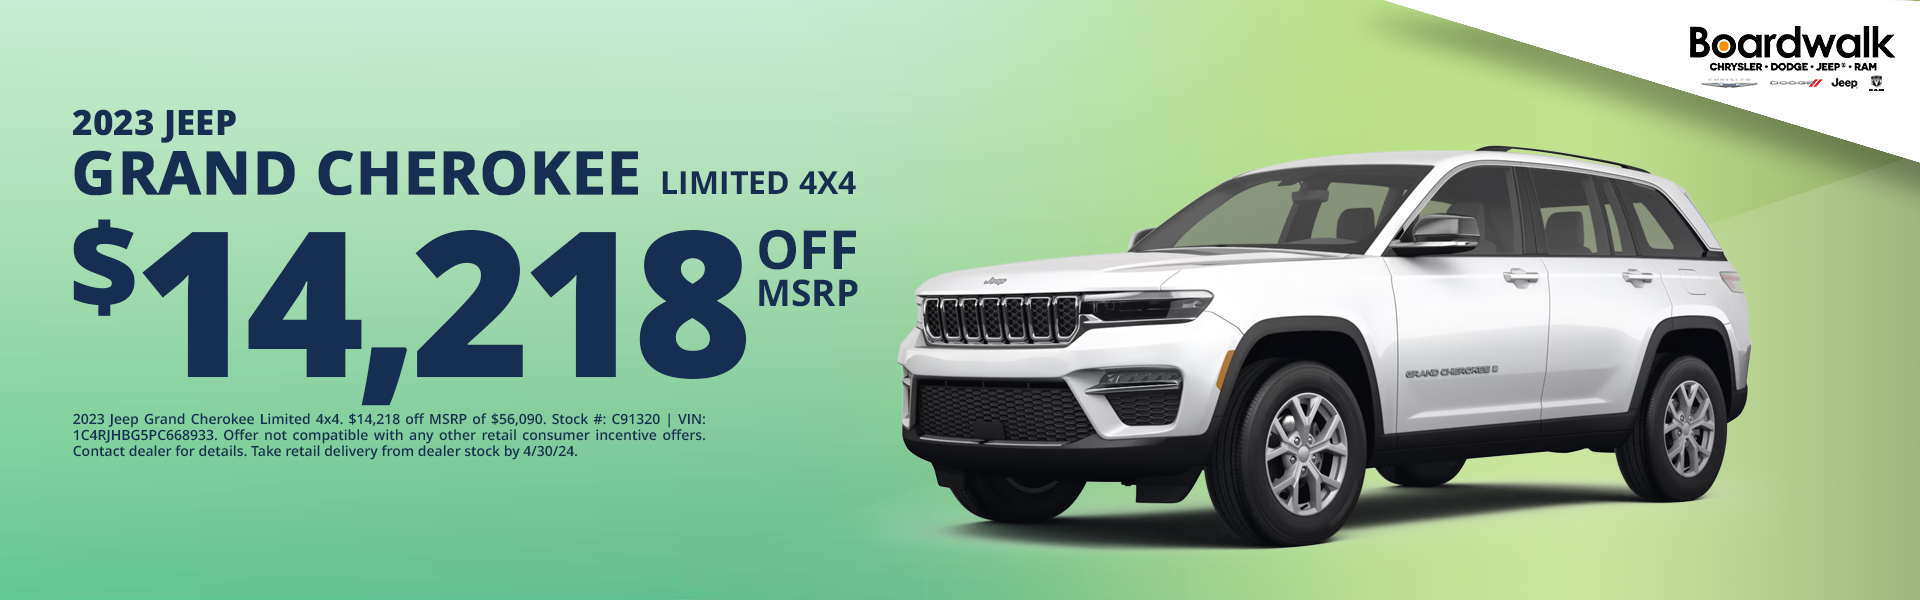 2023 Jeep Grand Cherokee $14218 off MSRP